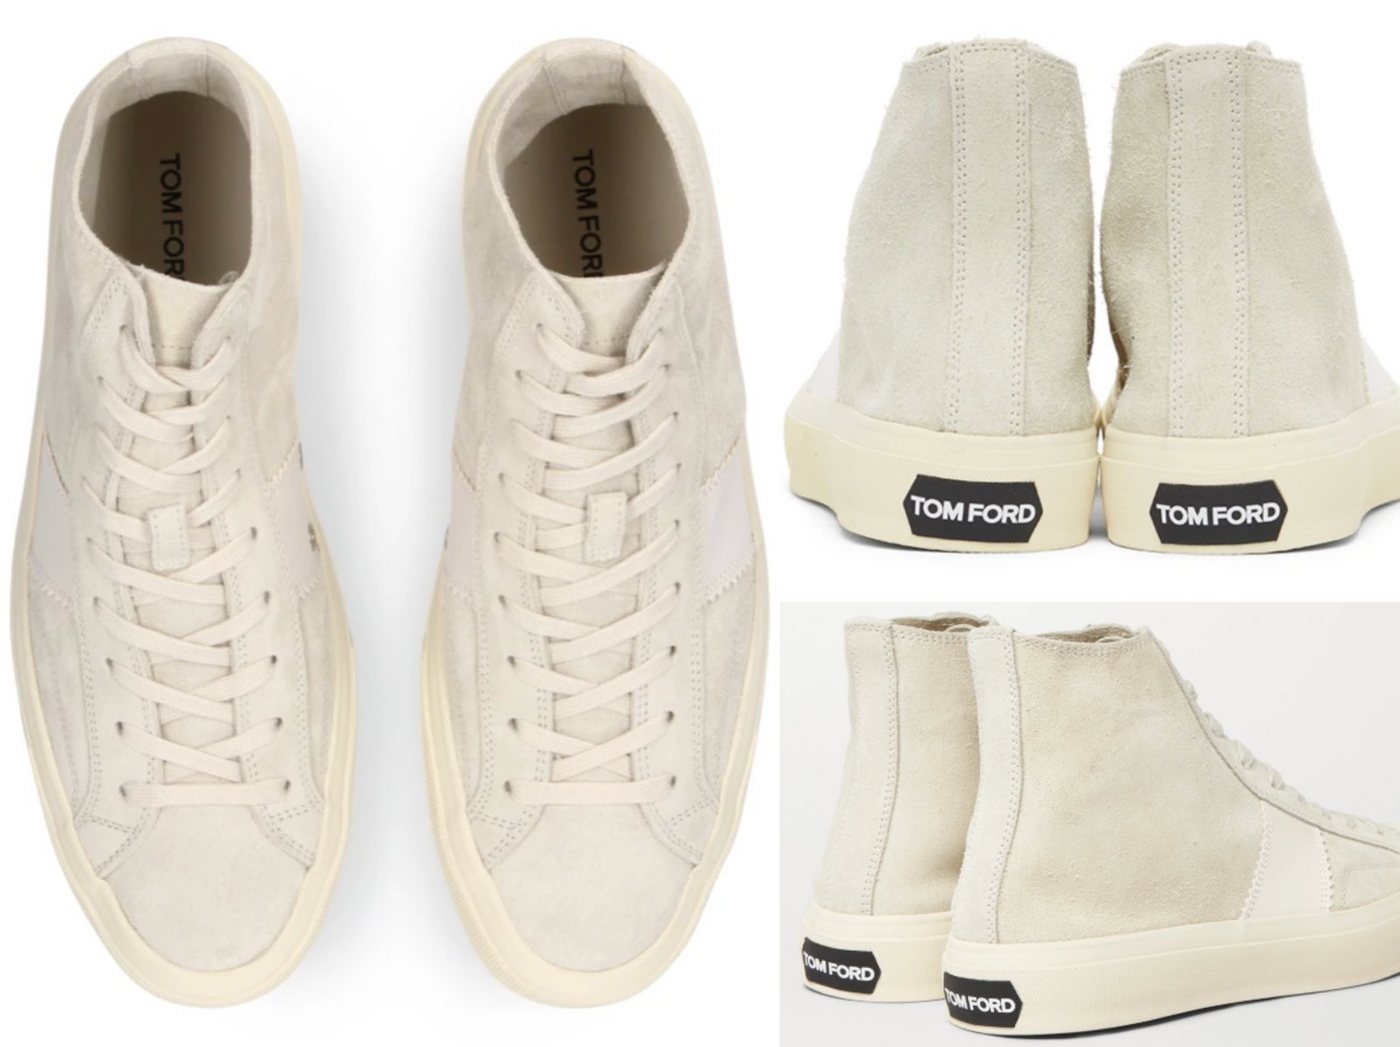 Tom Ford TOM FORD Cambridge Catwalk Item High-top Suede Sneakers Taupe Schuhe T Sneaker von Tom Ford